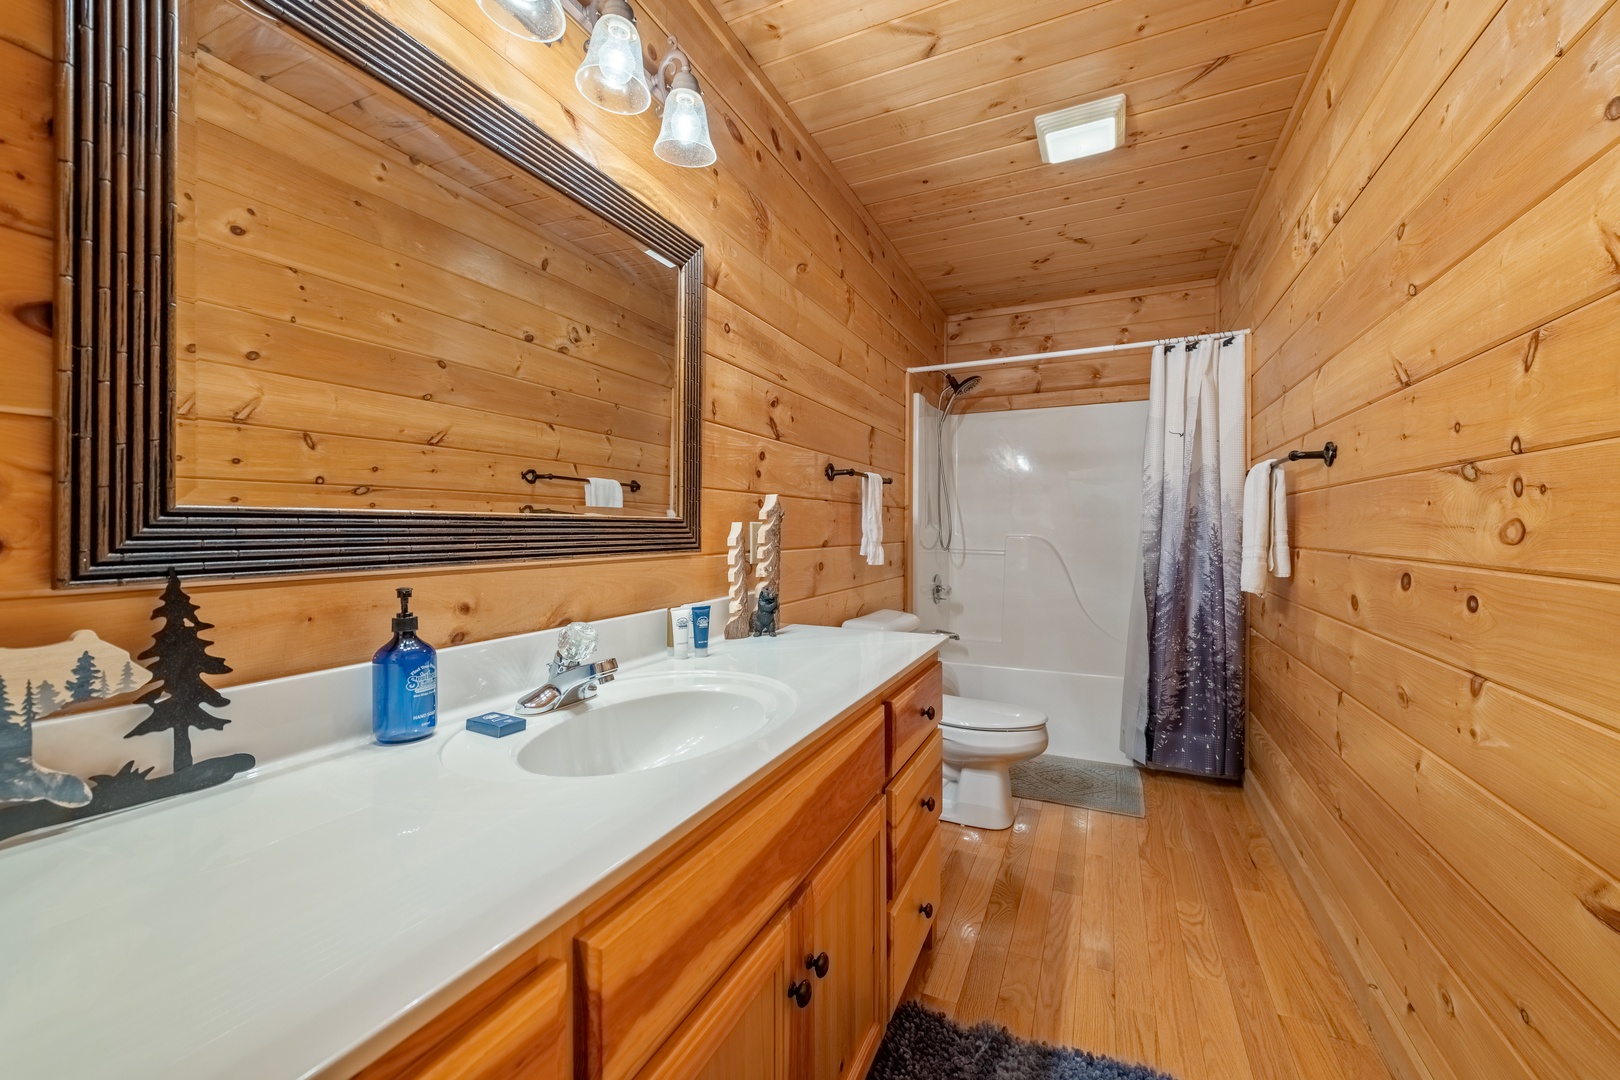 Sunset in the Mountains - Entry Level Shared Bathroom